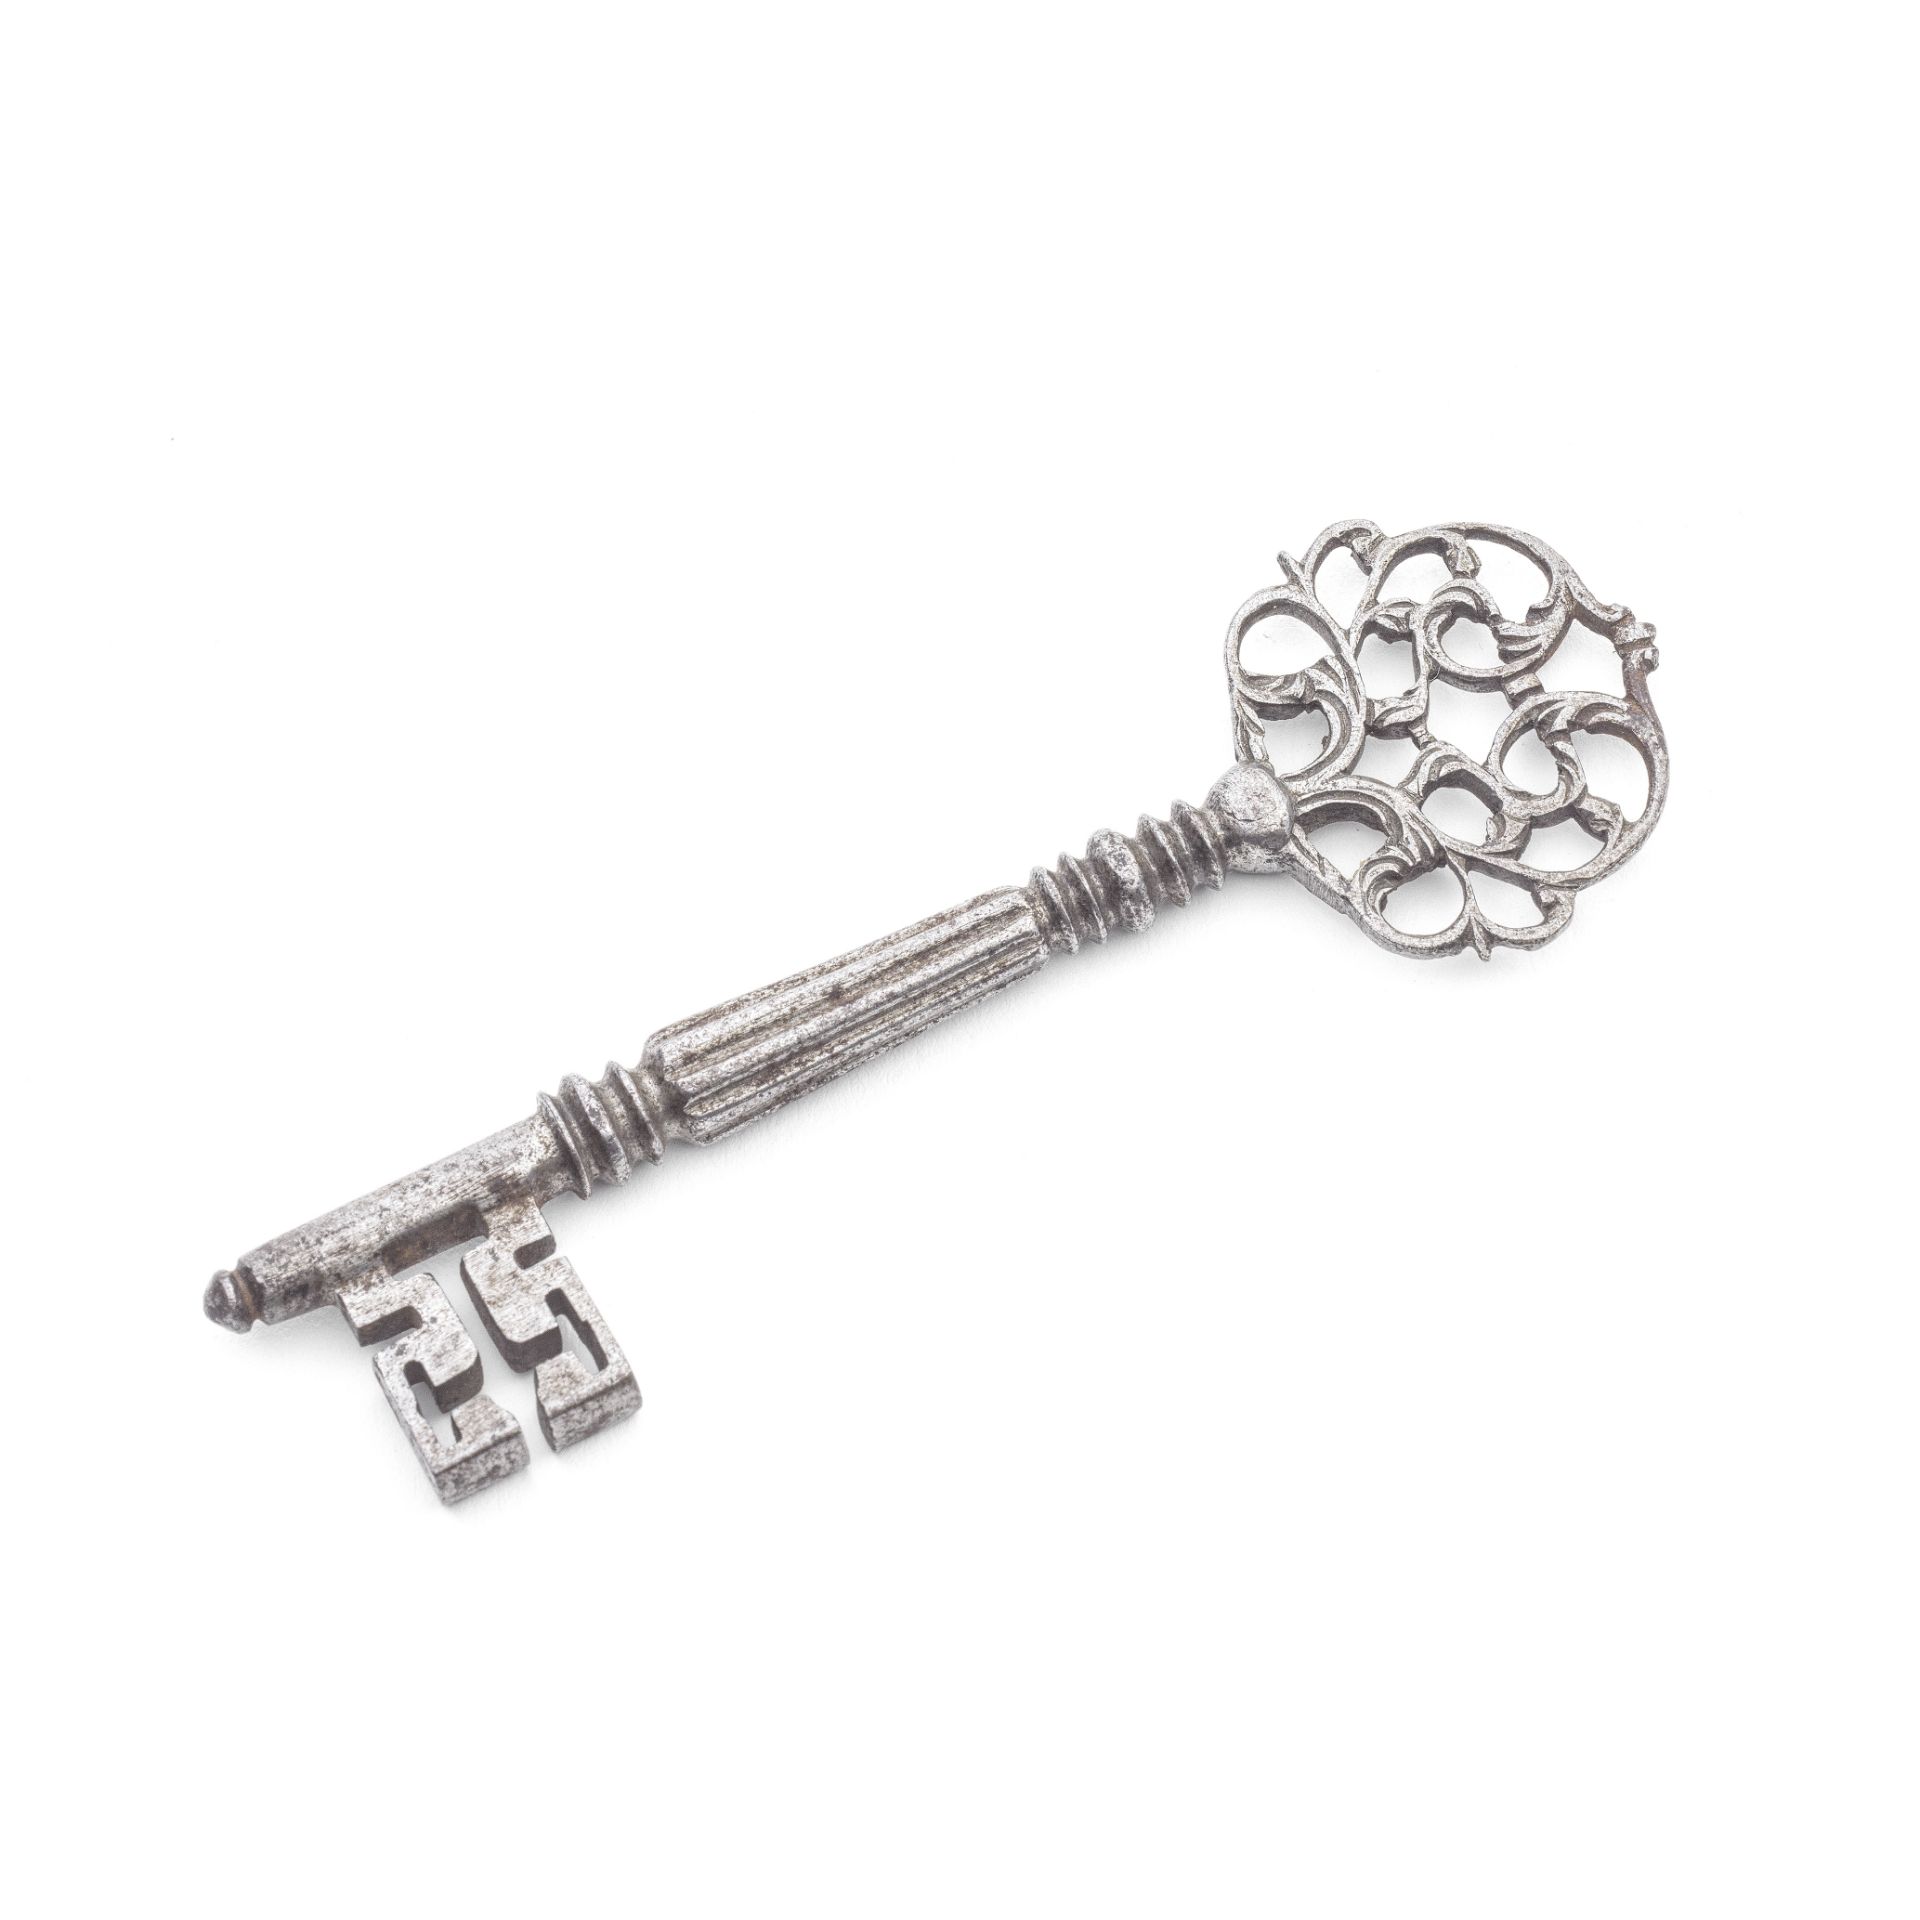 An 18th century steel key probably French